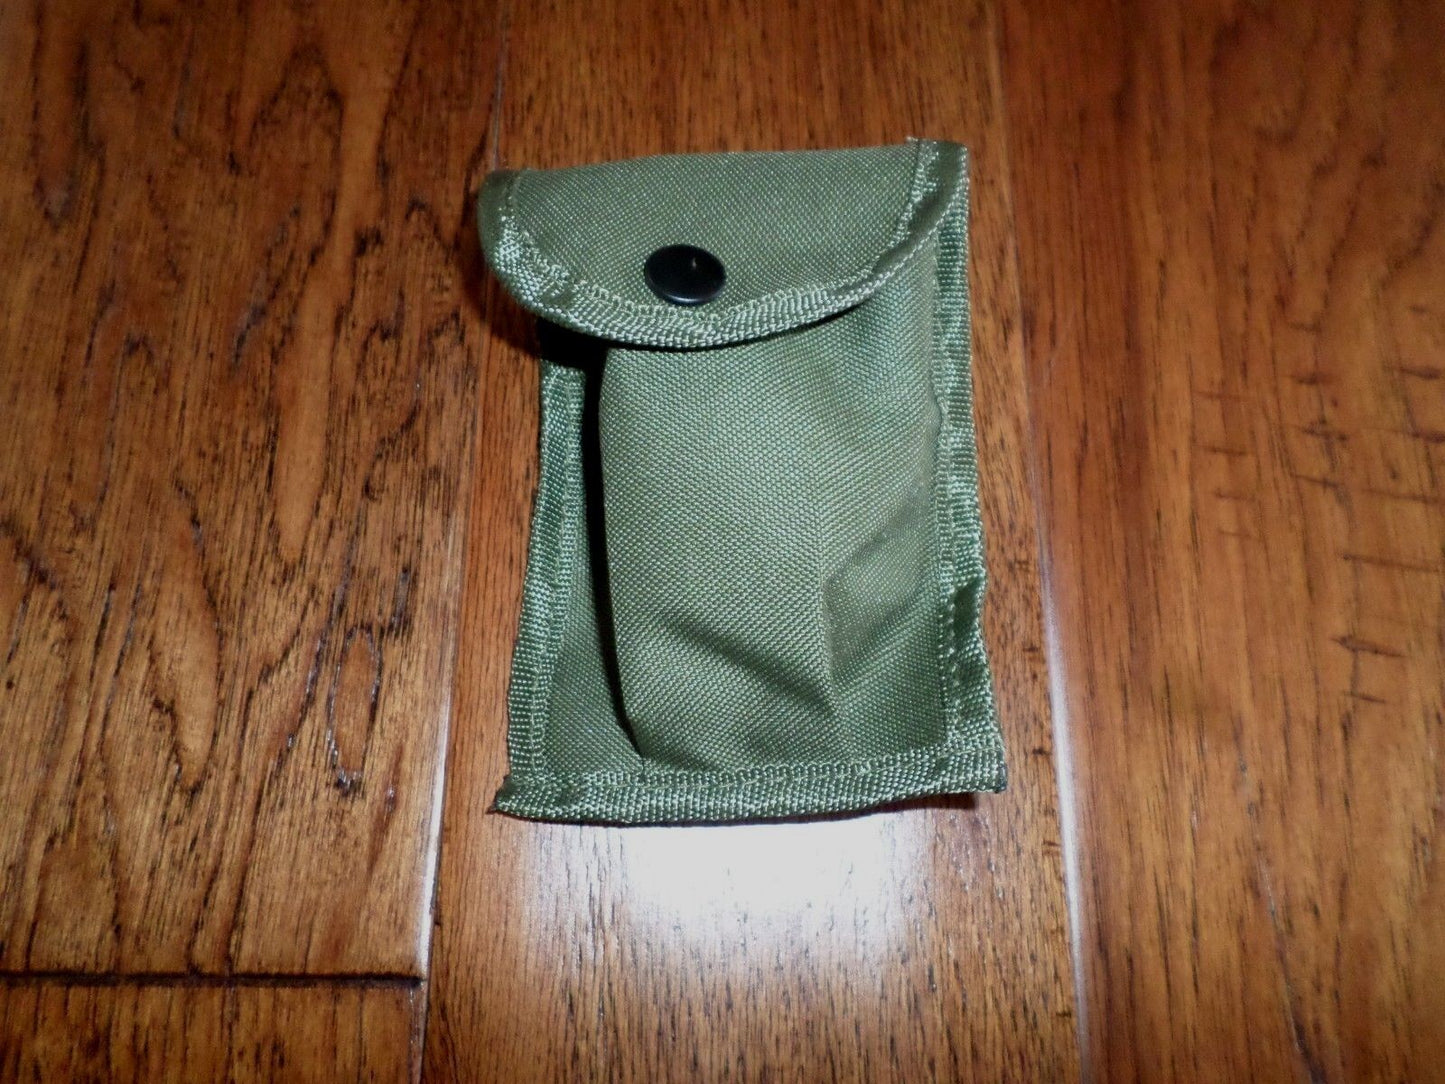 U.S MILITARY STYLE COMPASS FIRST AID CASE NYLON BELT POUCH OD GREEN